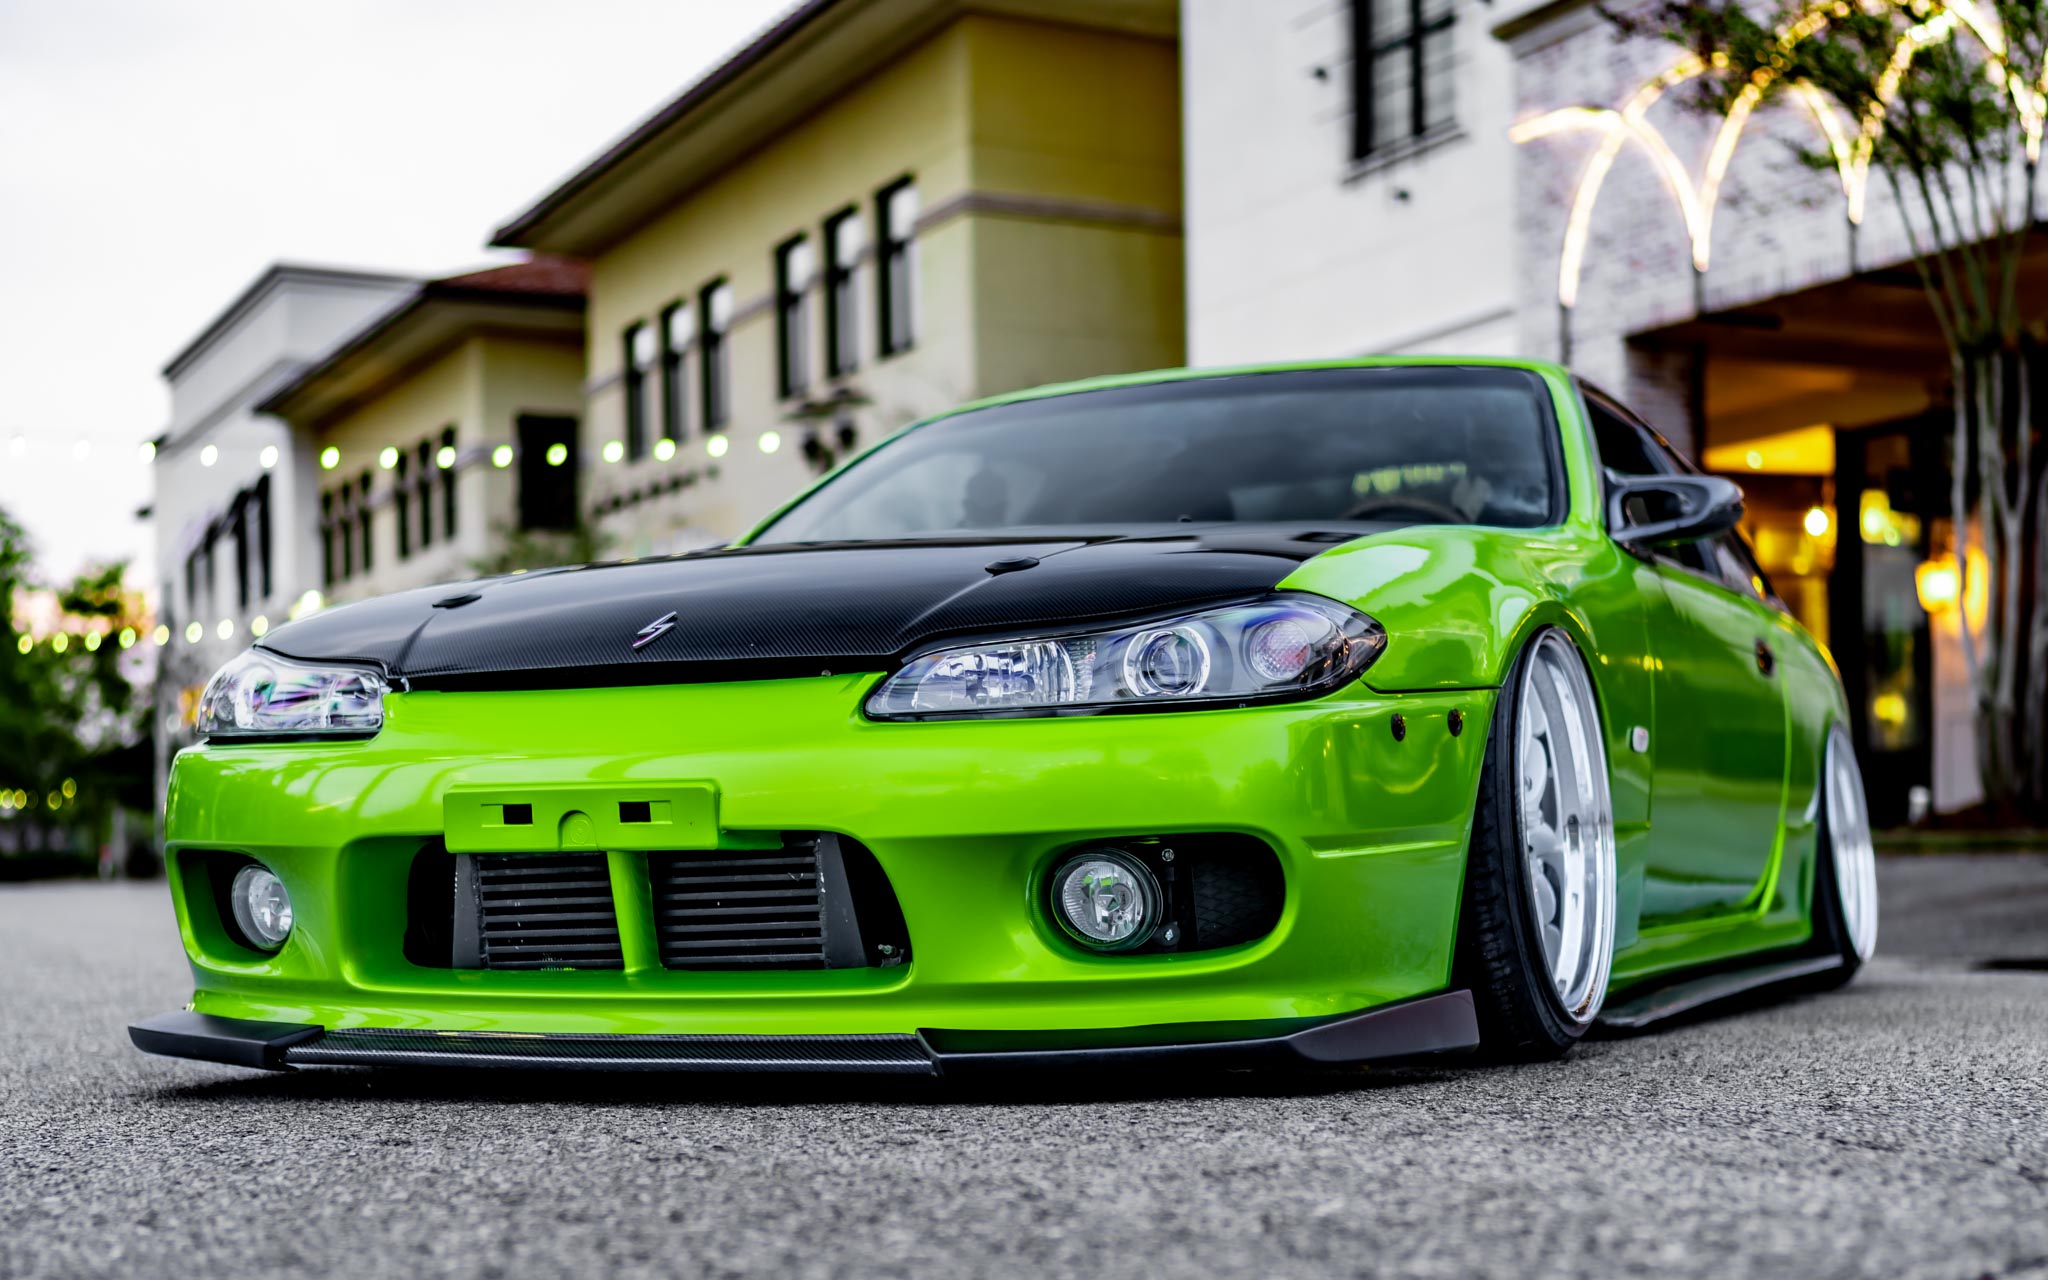 S15 front end S14